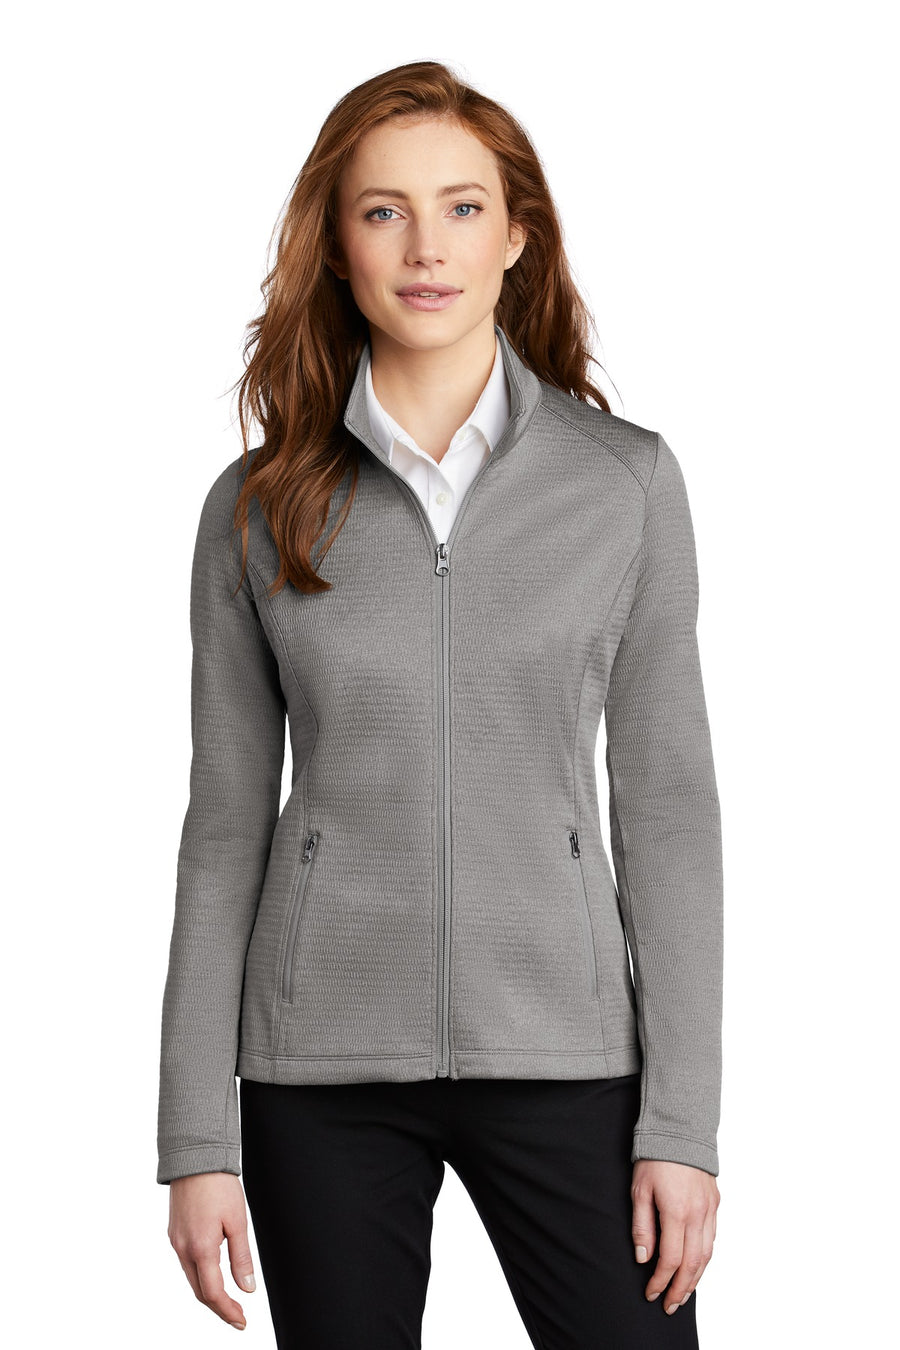 L249-Gusty Grey Heather-front_model